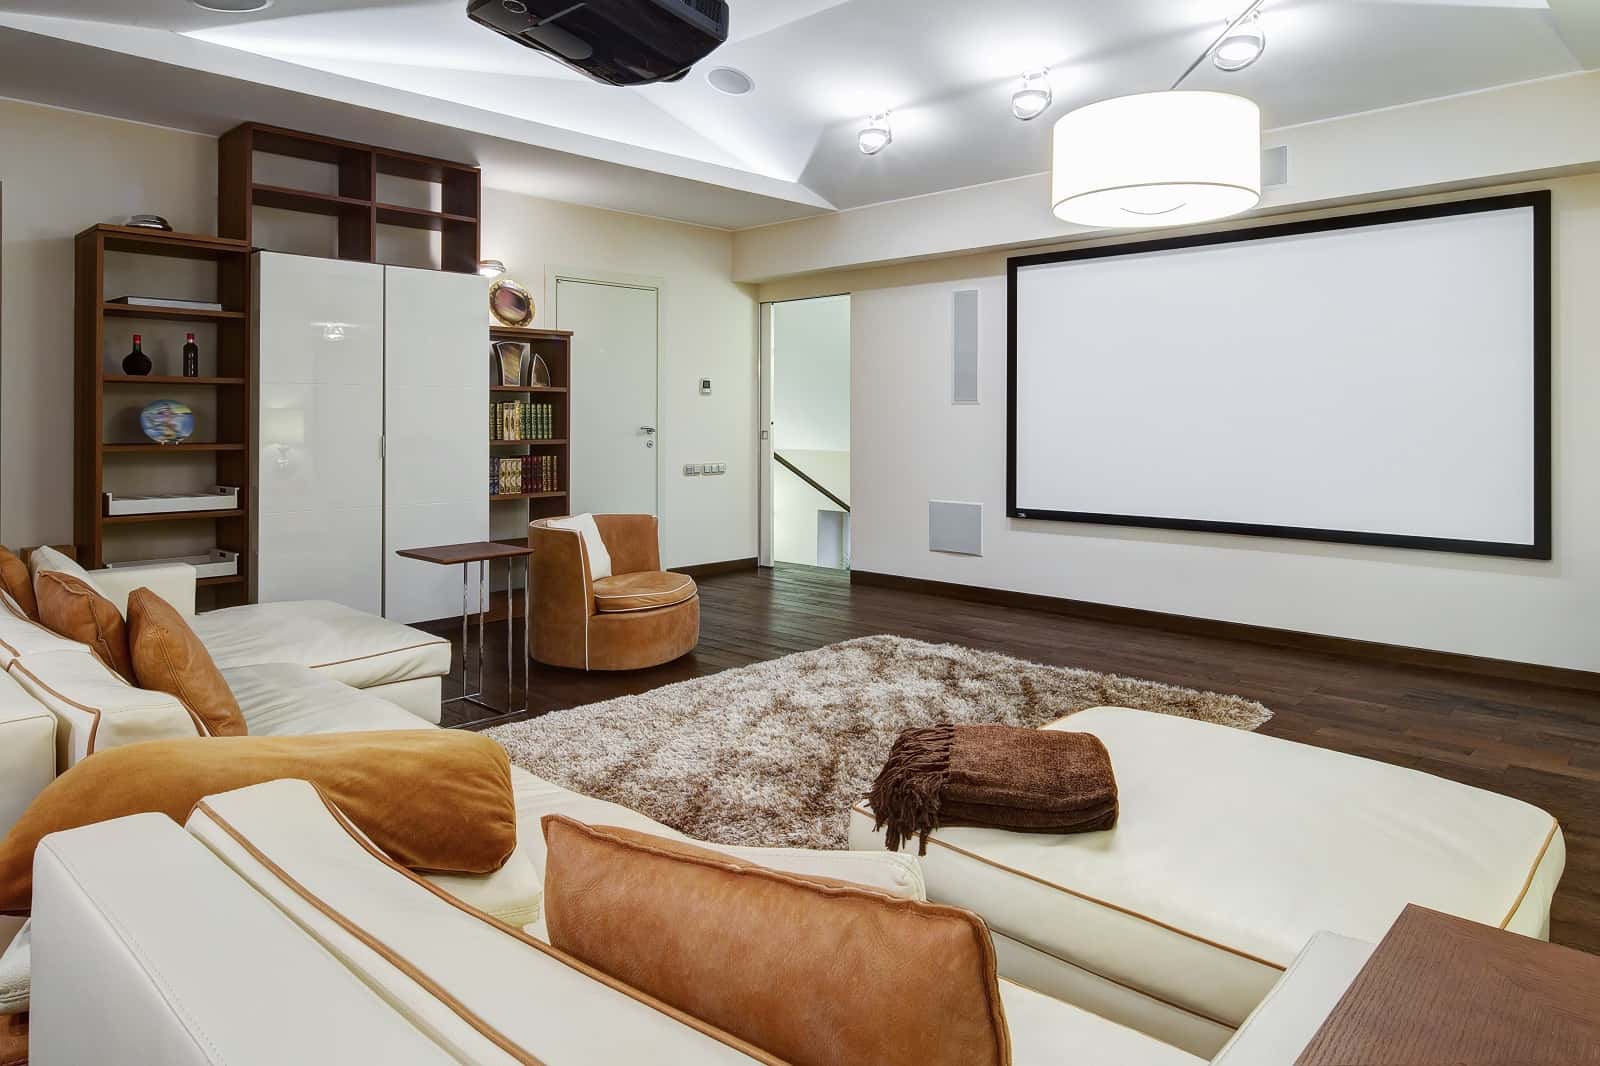 4 Makeover Tips For Creating The Perfect Home Theater Design. White colored interior in casual style with brown floor and furniture inclusions